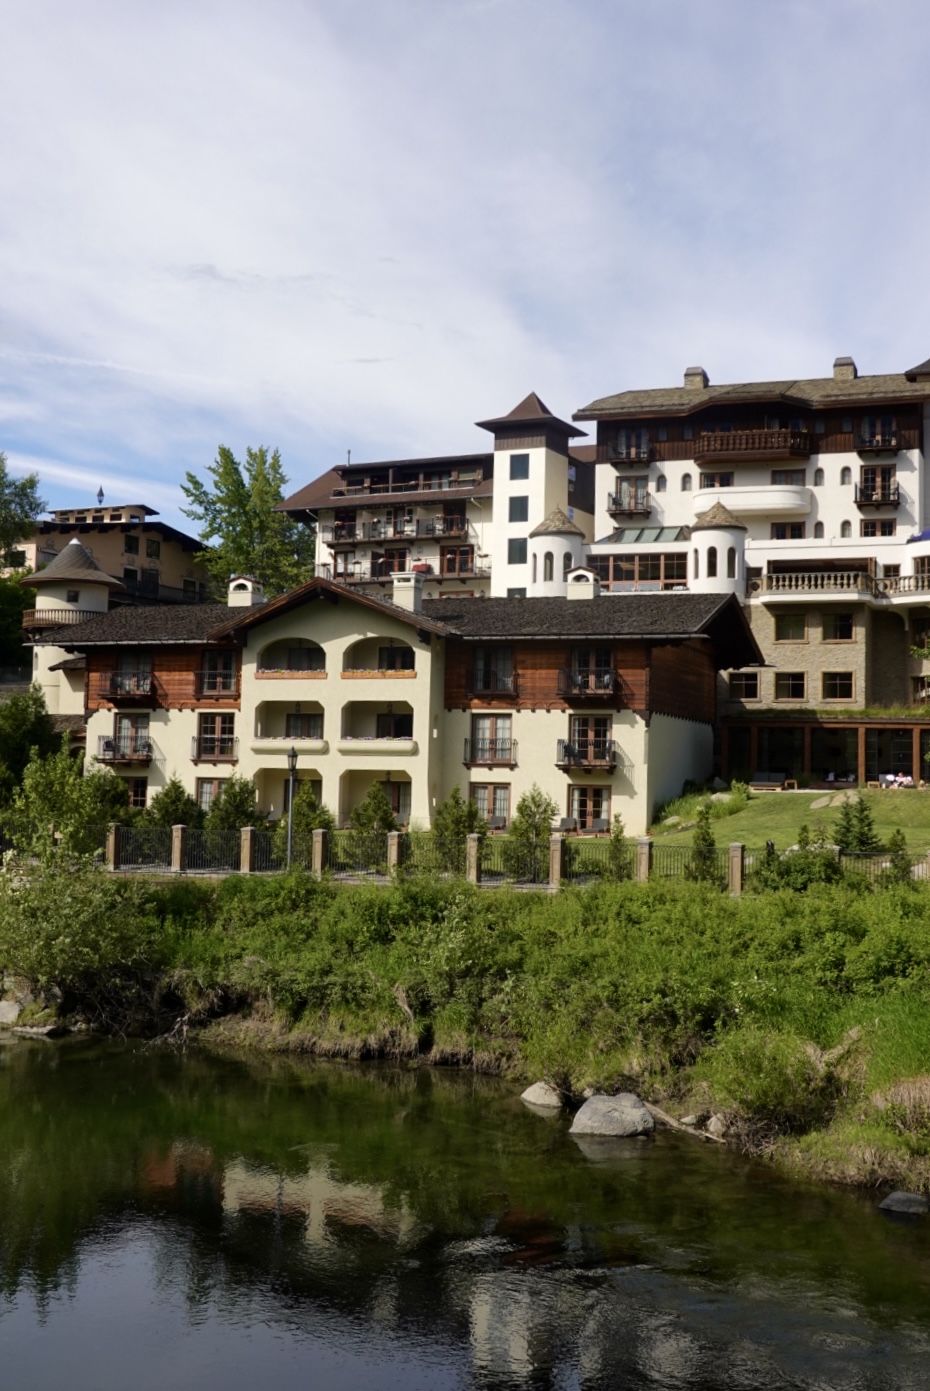 The Best Places to Stay in Leavenworth: From Camping to Cabins to Hotels